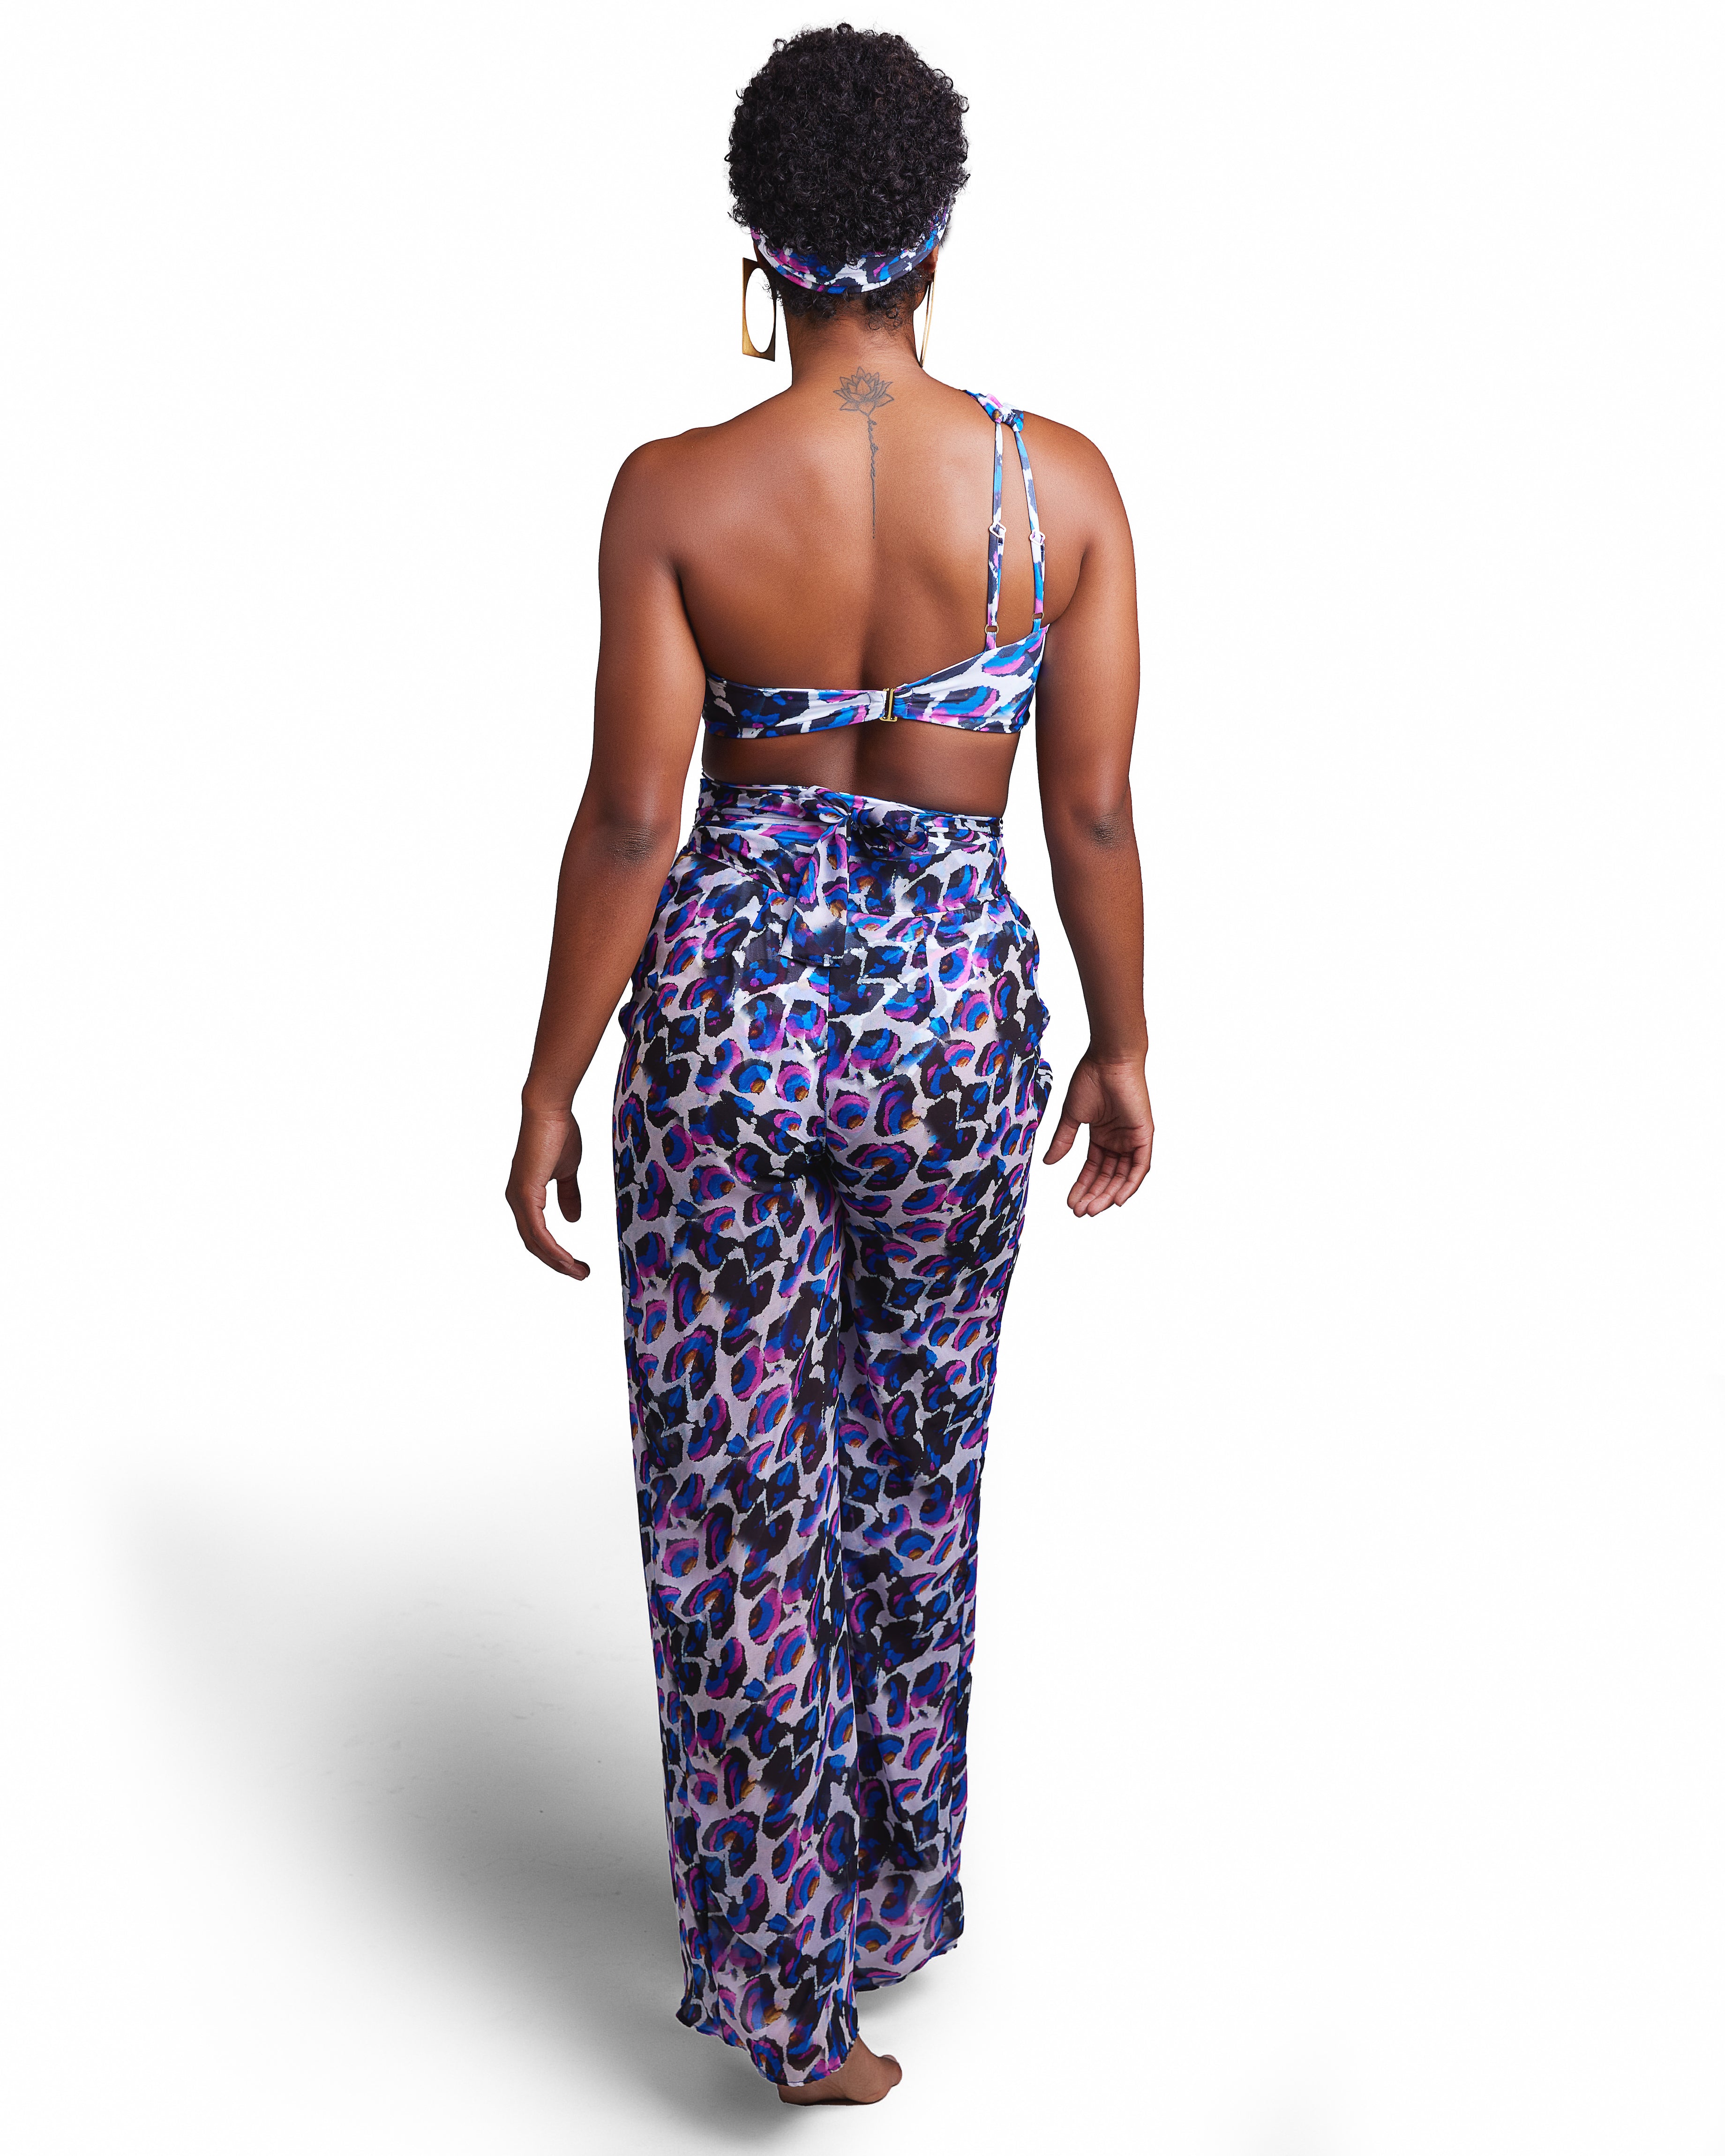 Afro-Floral - Wrap Pants - Hand Made Story by Barbara Alli